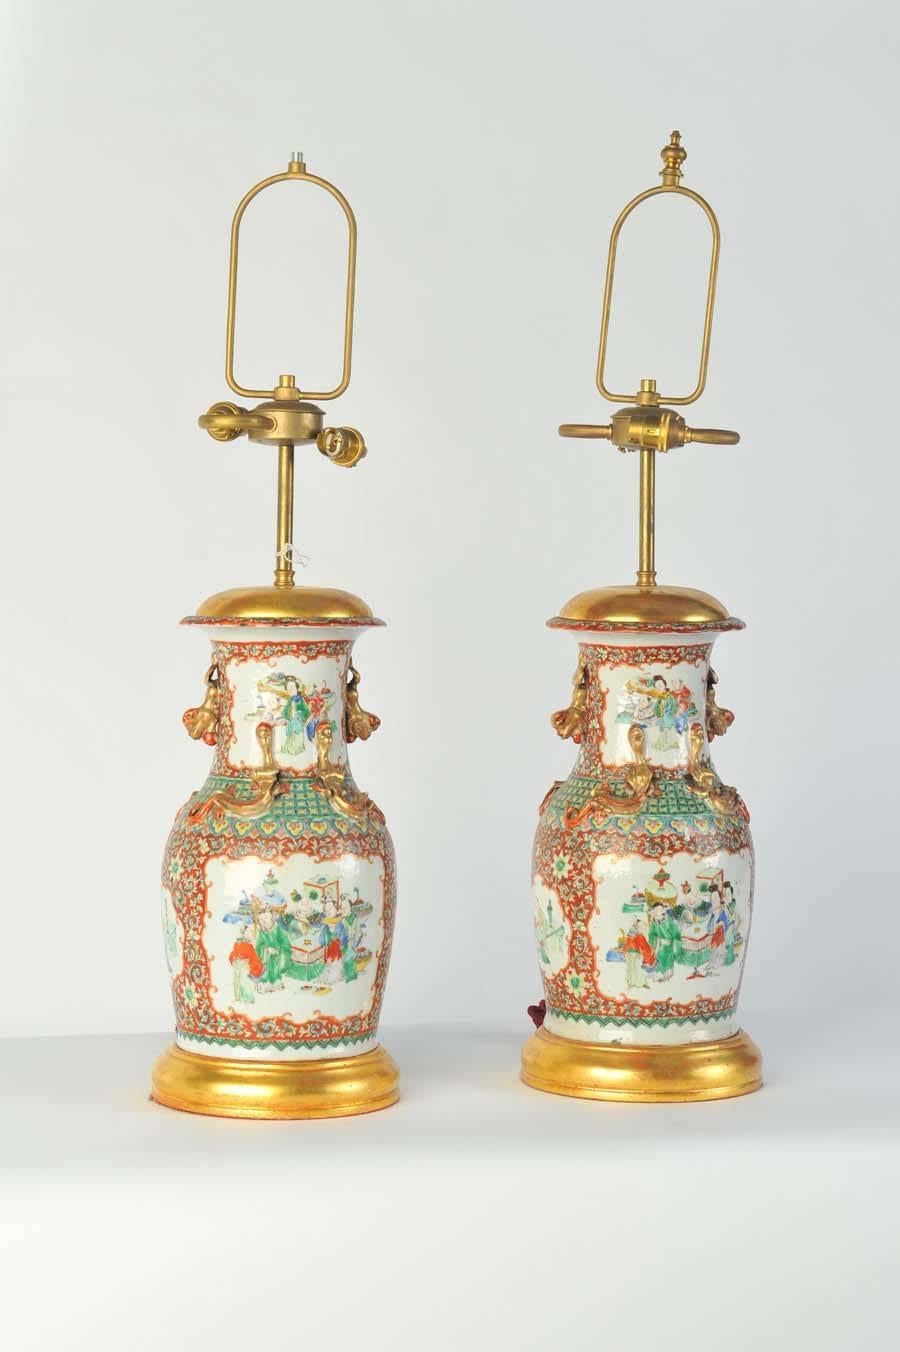 A good quality pair of Chinese Canton porcelain vases converted to lamps.